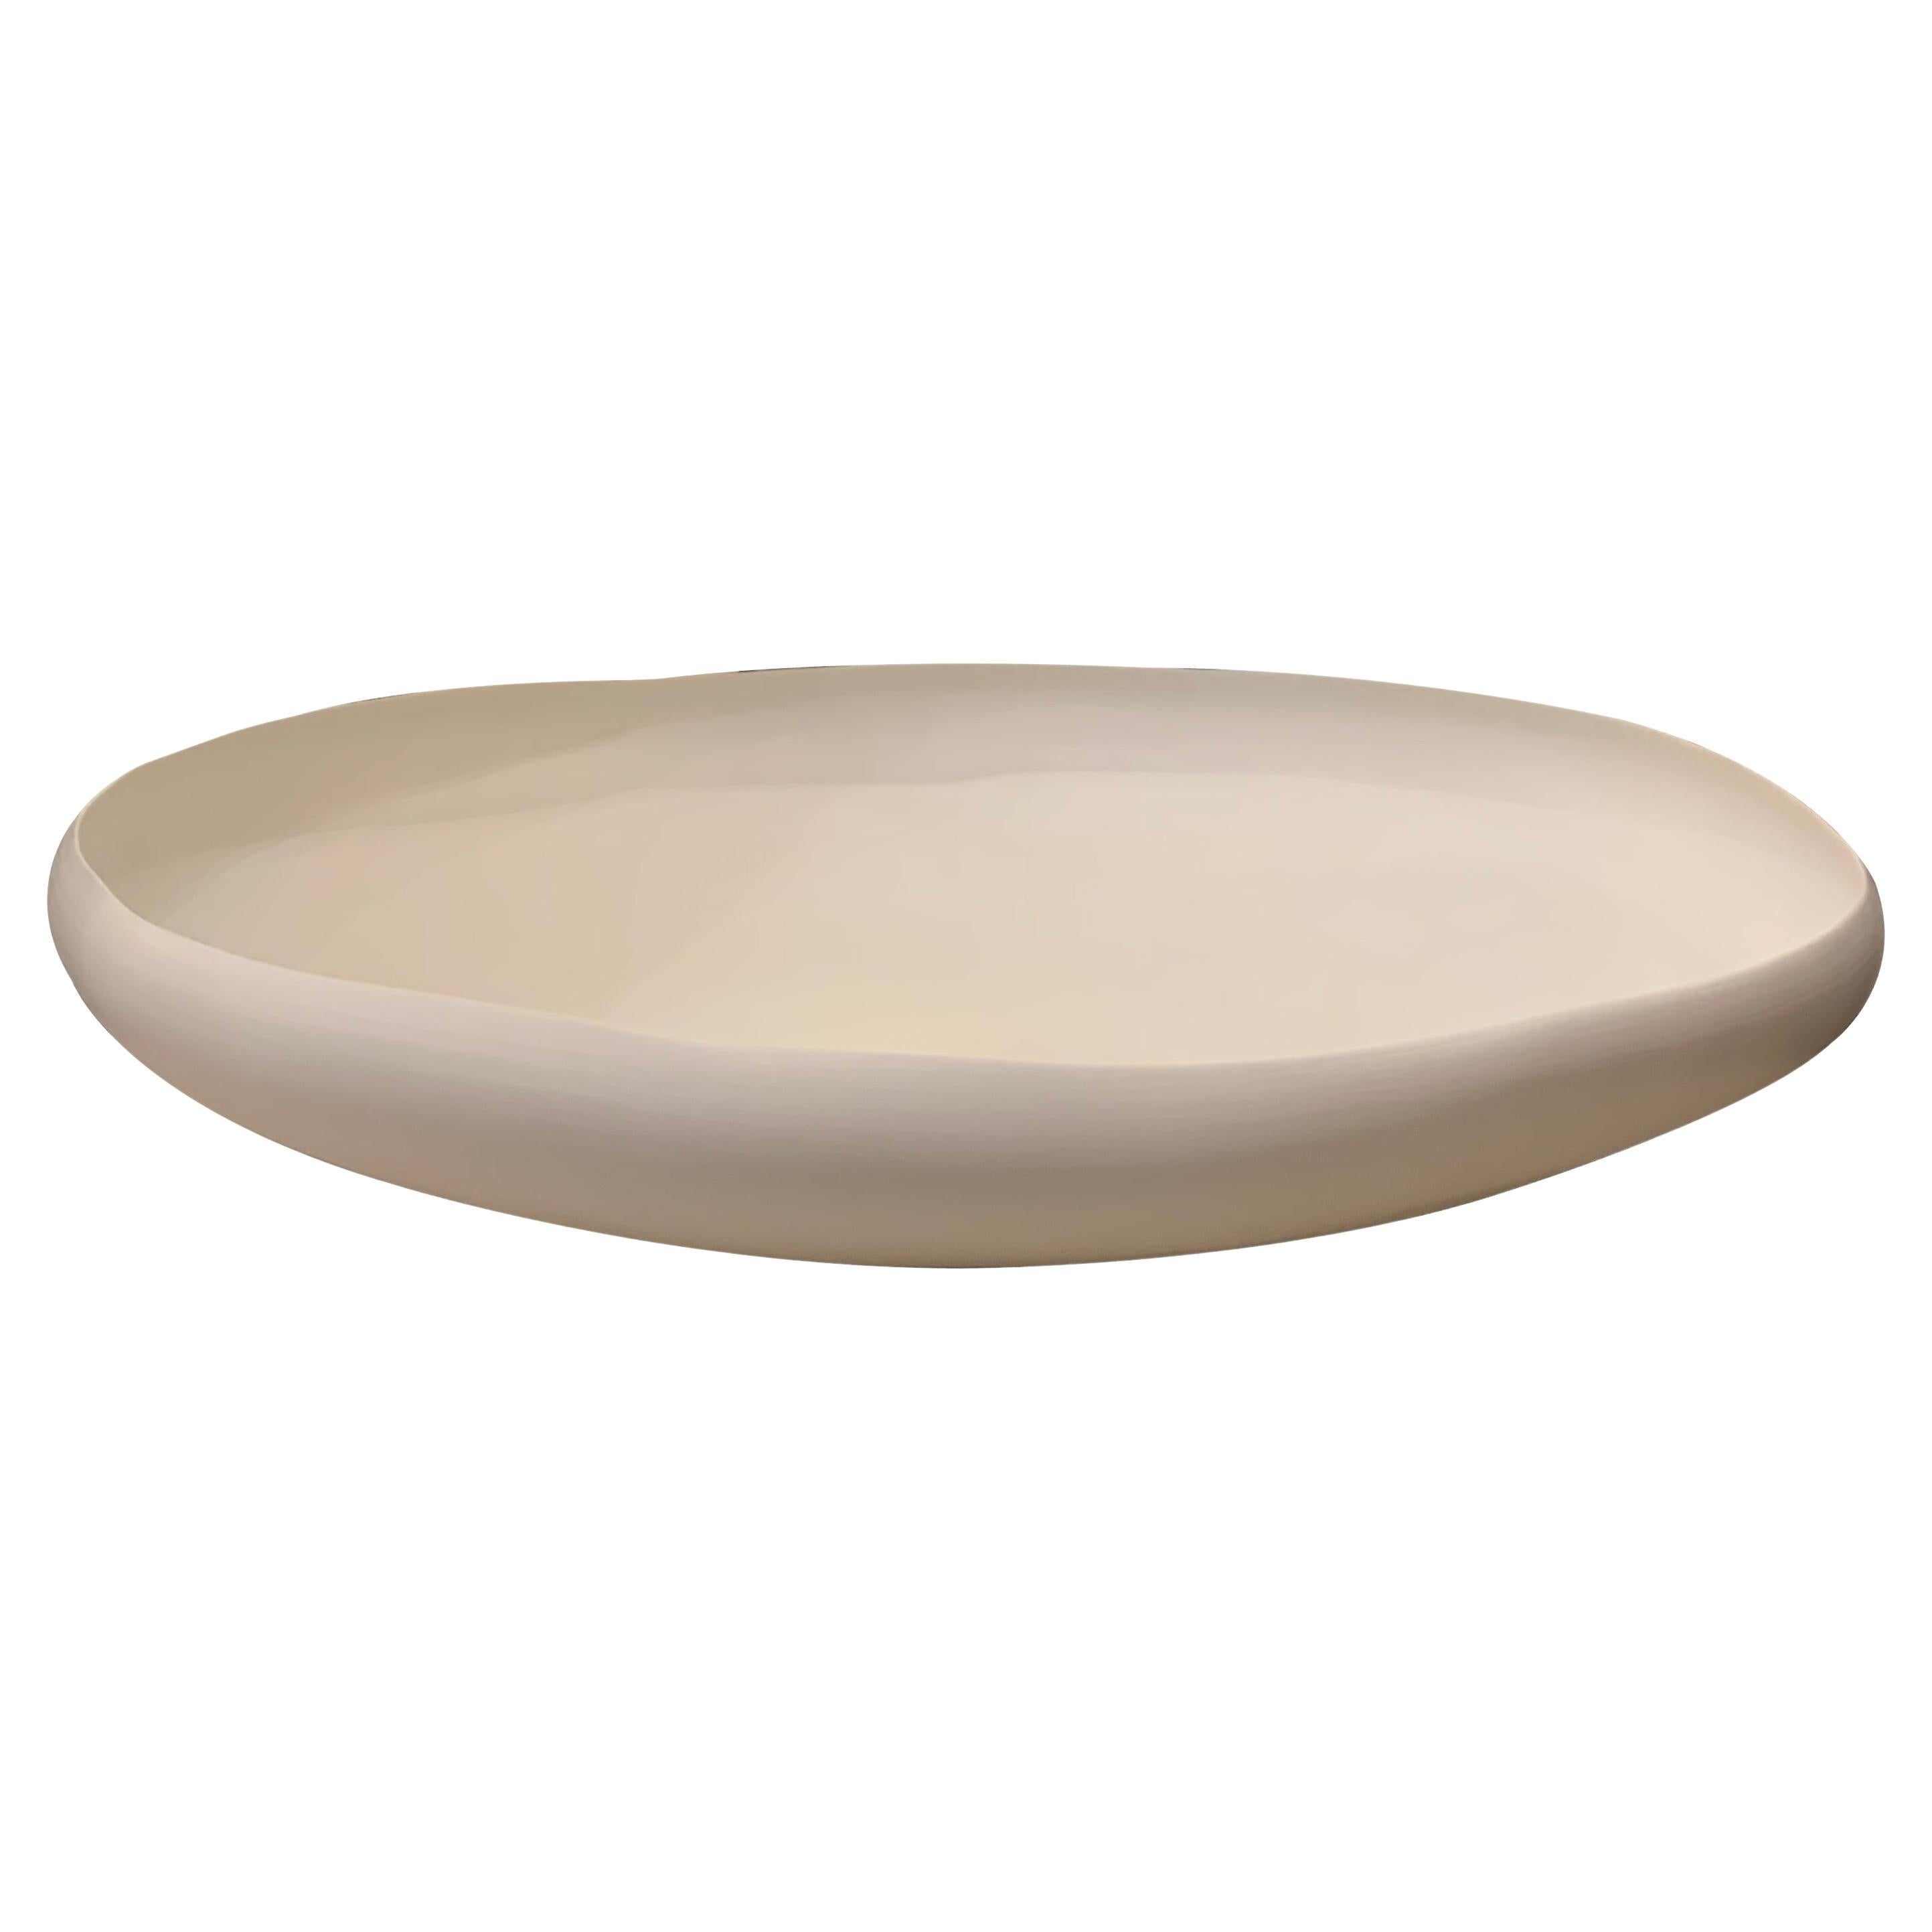 Linen Color Large Curved Bowl, Italy, Contemporary